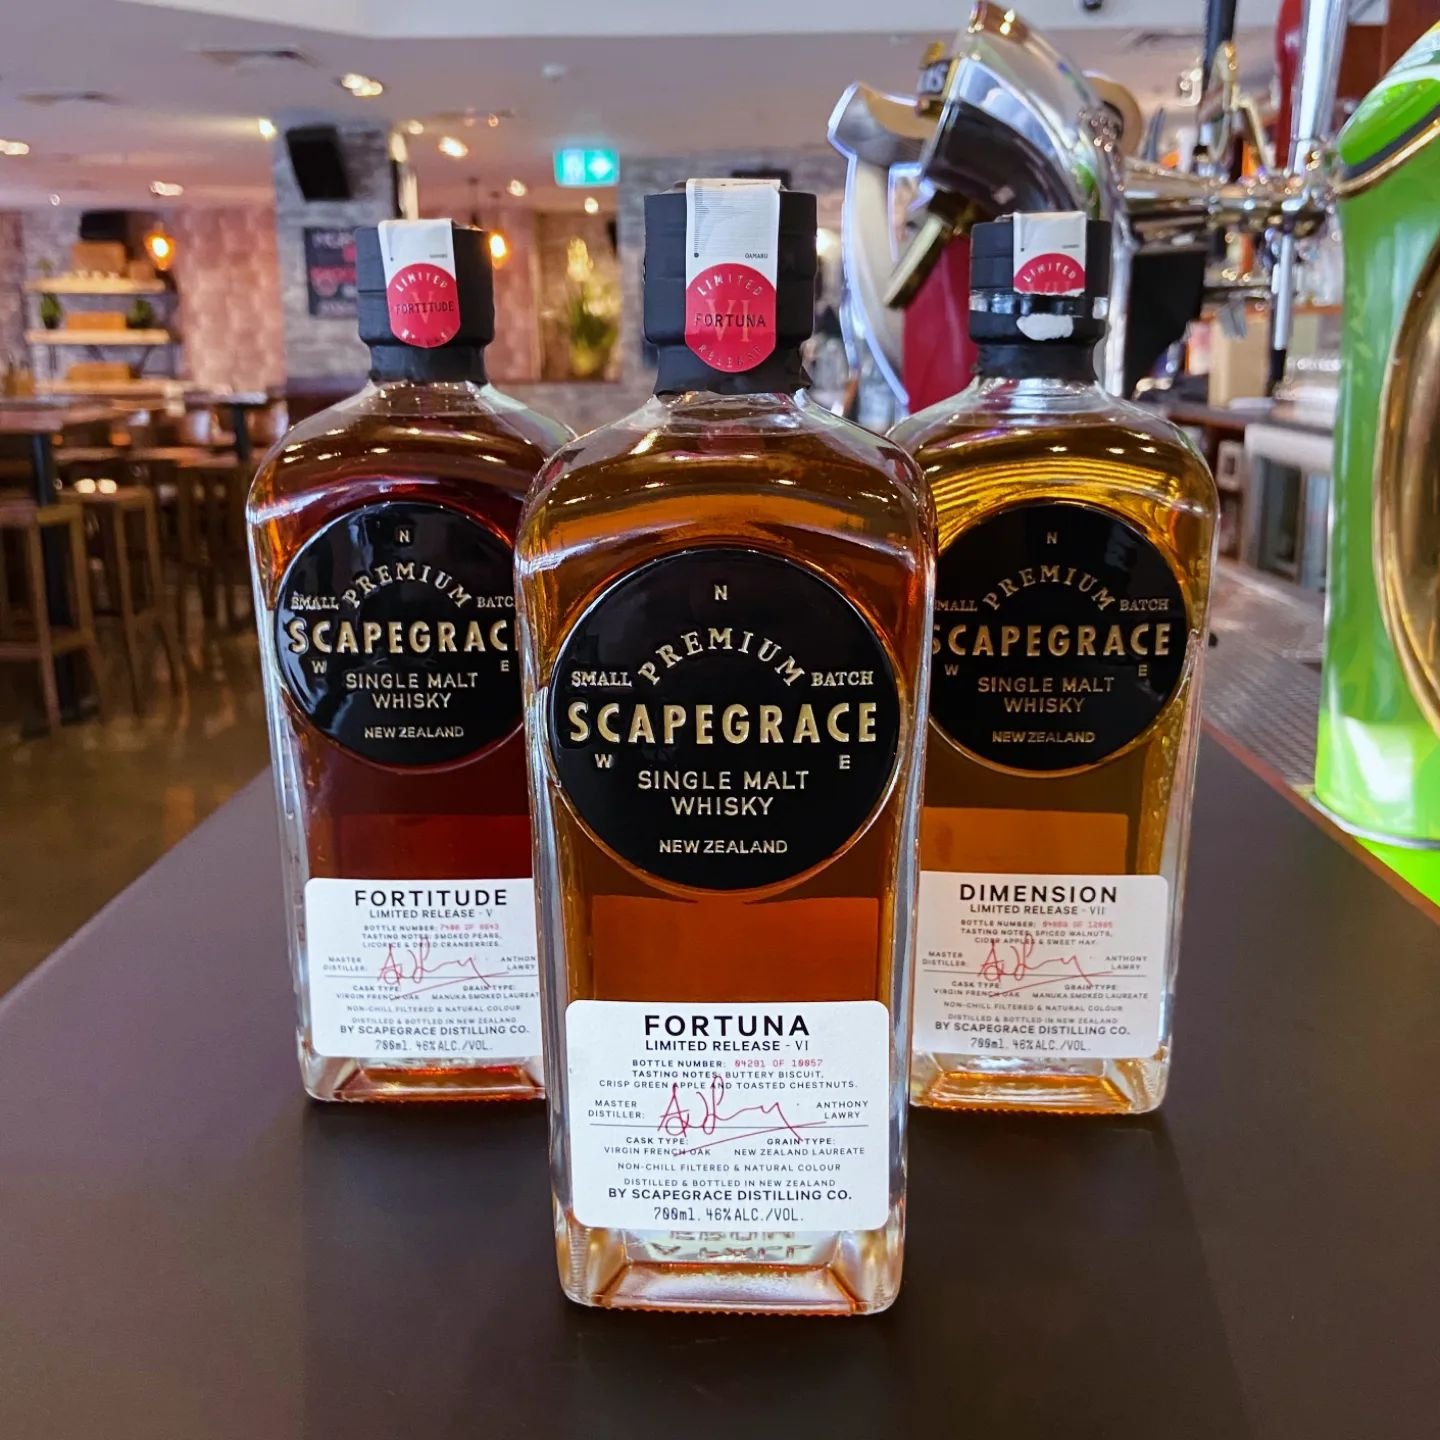 &quot;Too much of anything is bad, but too much of good whisky is barely enough&quot; - Mark Twain 

🥃 @scapegrace